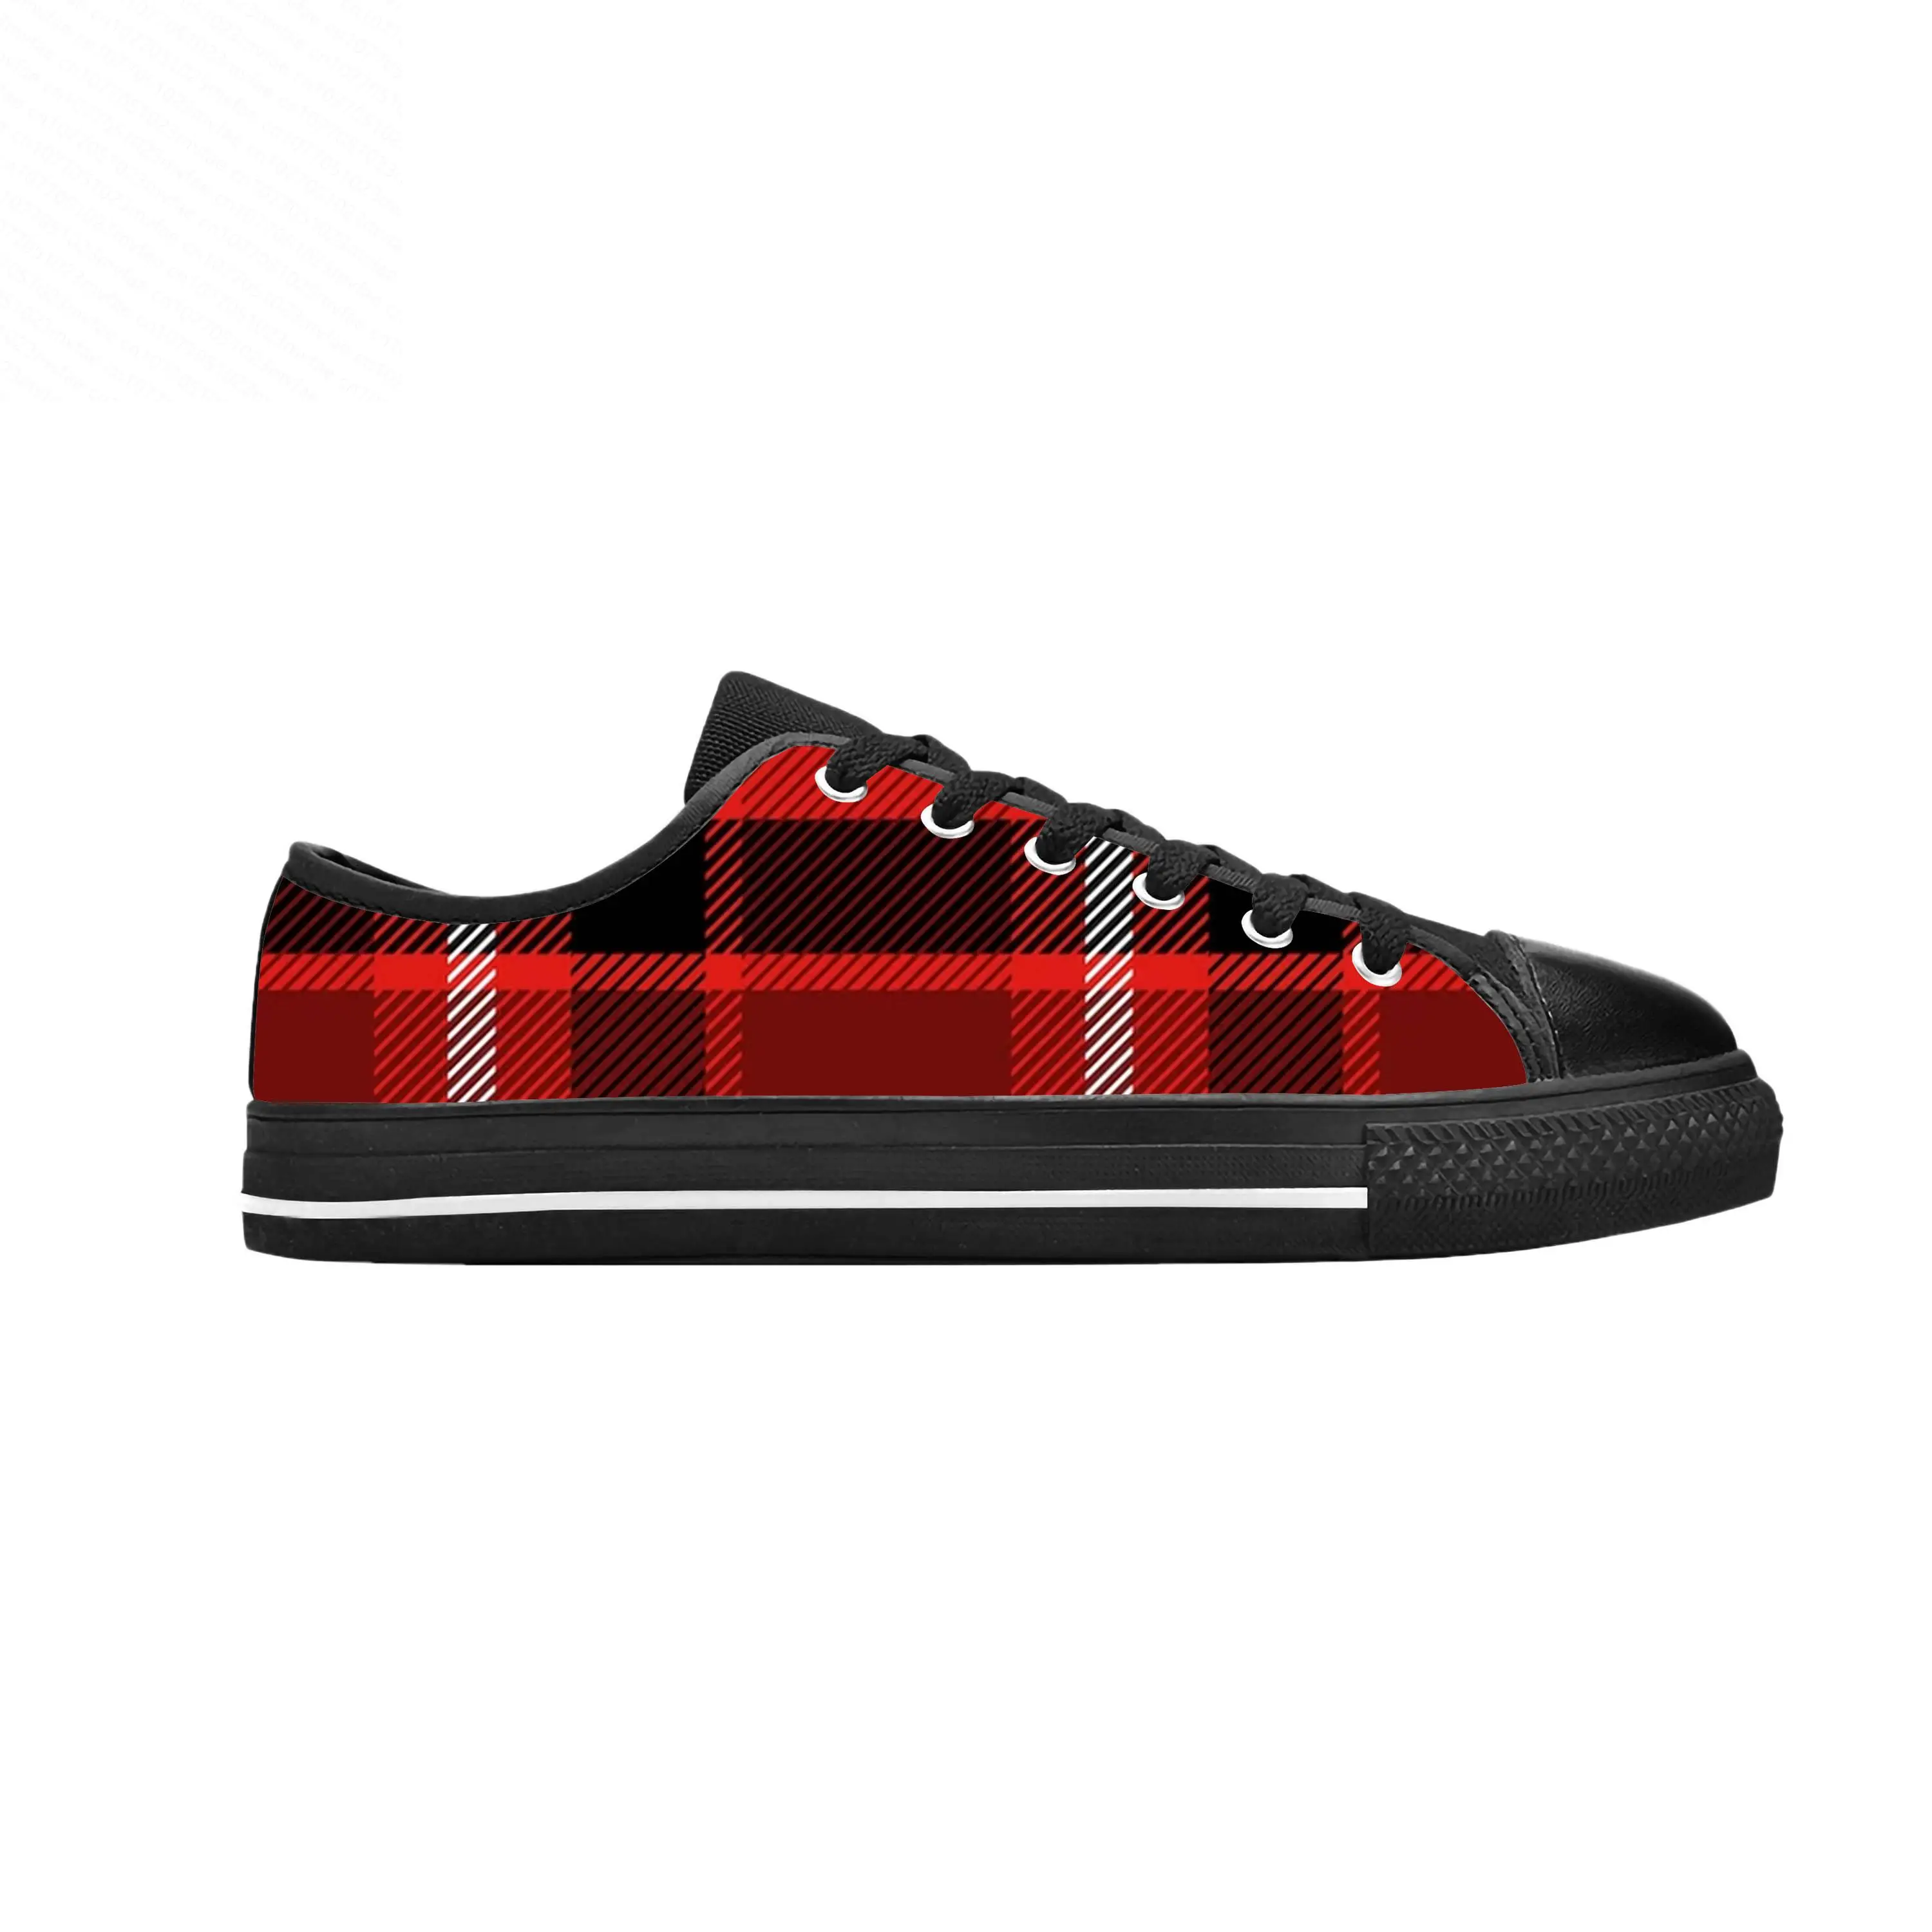 

Hot Red Buffalo Scottish Stewart Clan Tartan Plaid Casual Cloth Shoes Low Top Comfortable Breathable 3D Print Men Women Sneakers